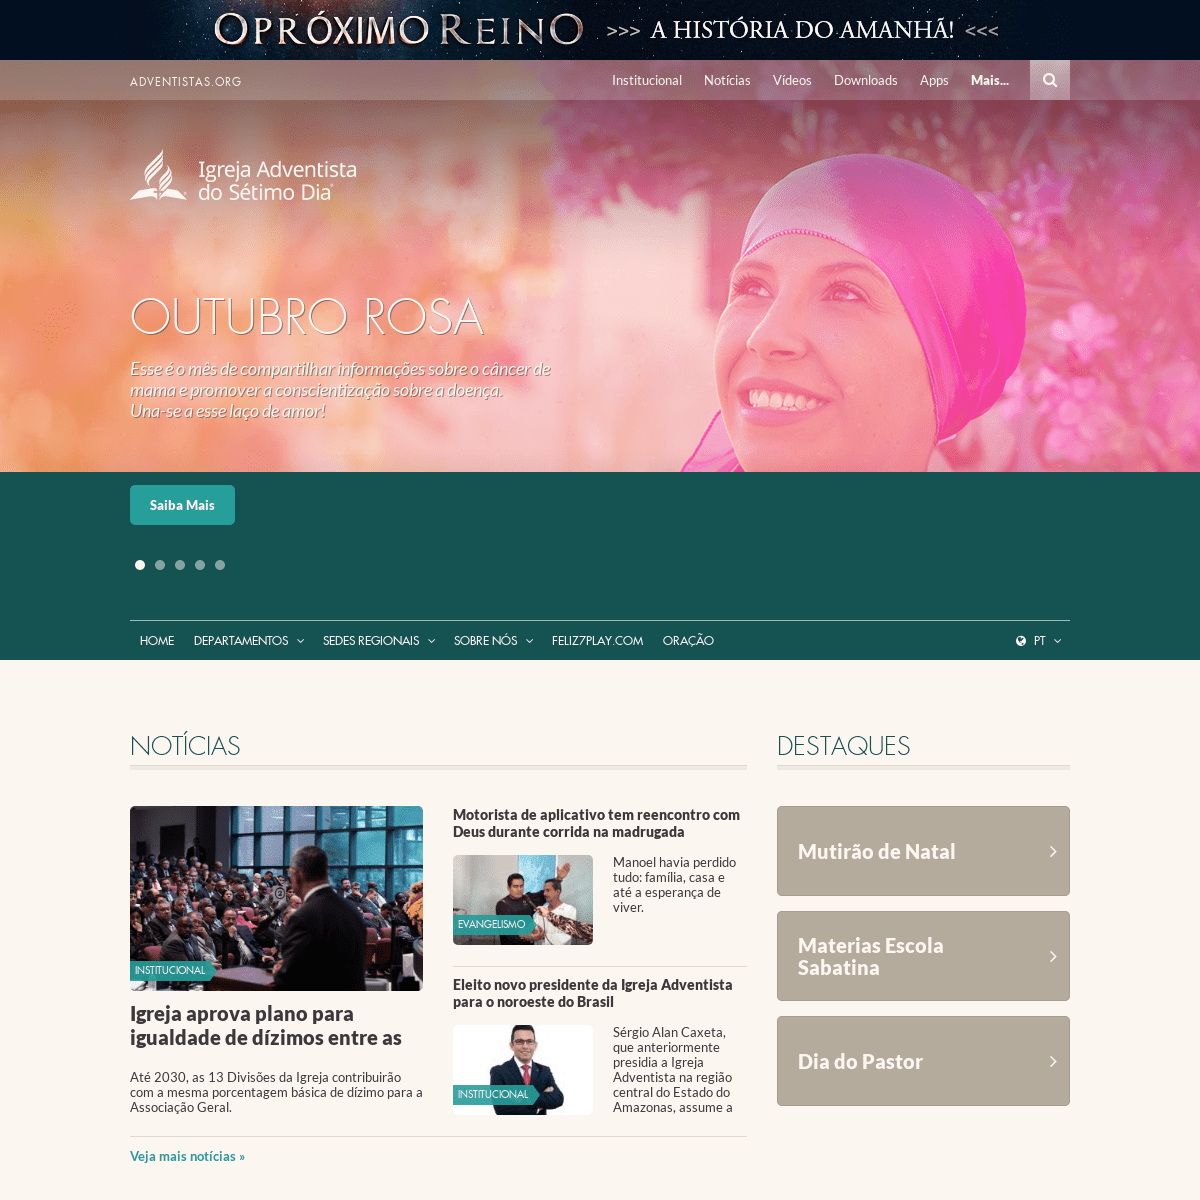 A complete backup of adventistas.org